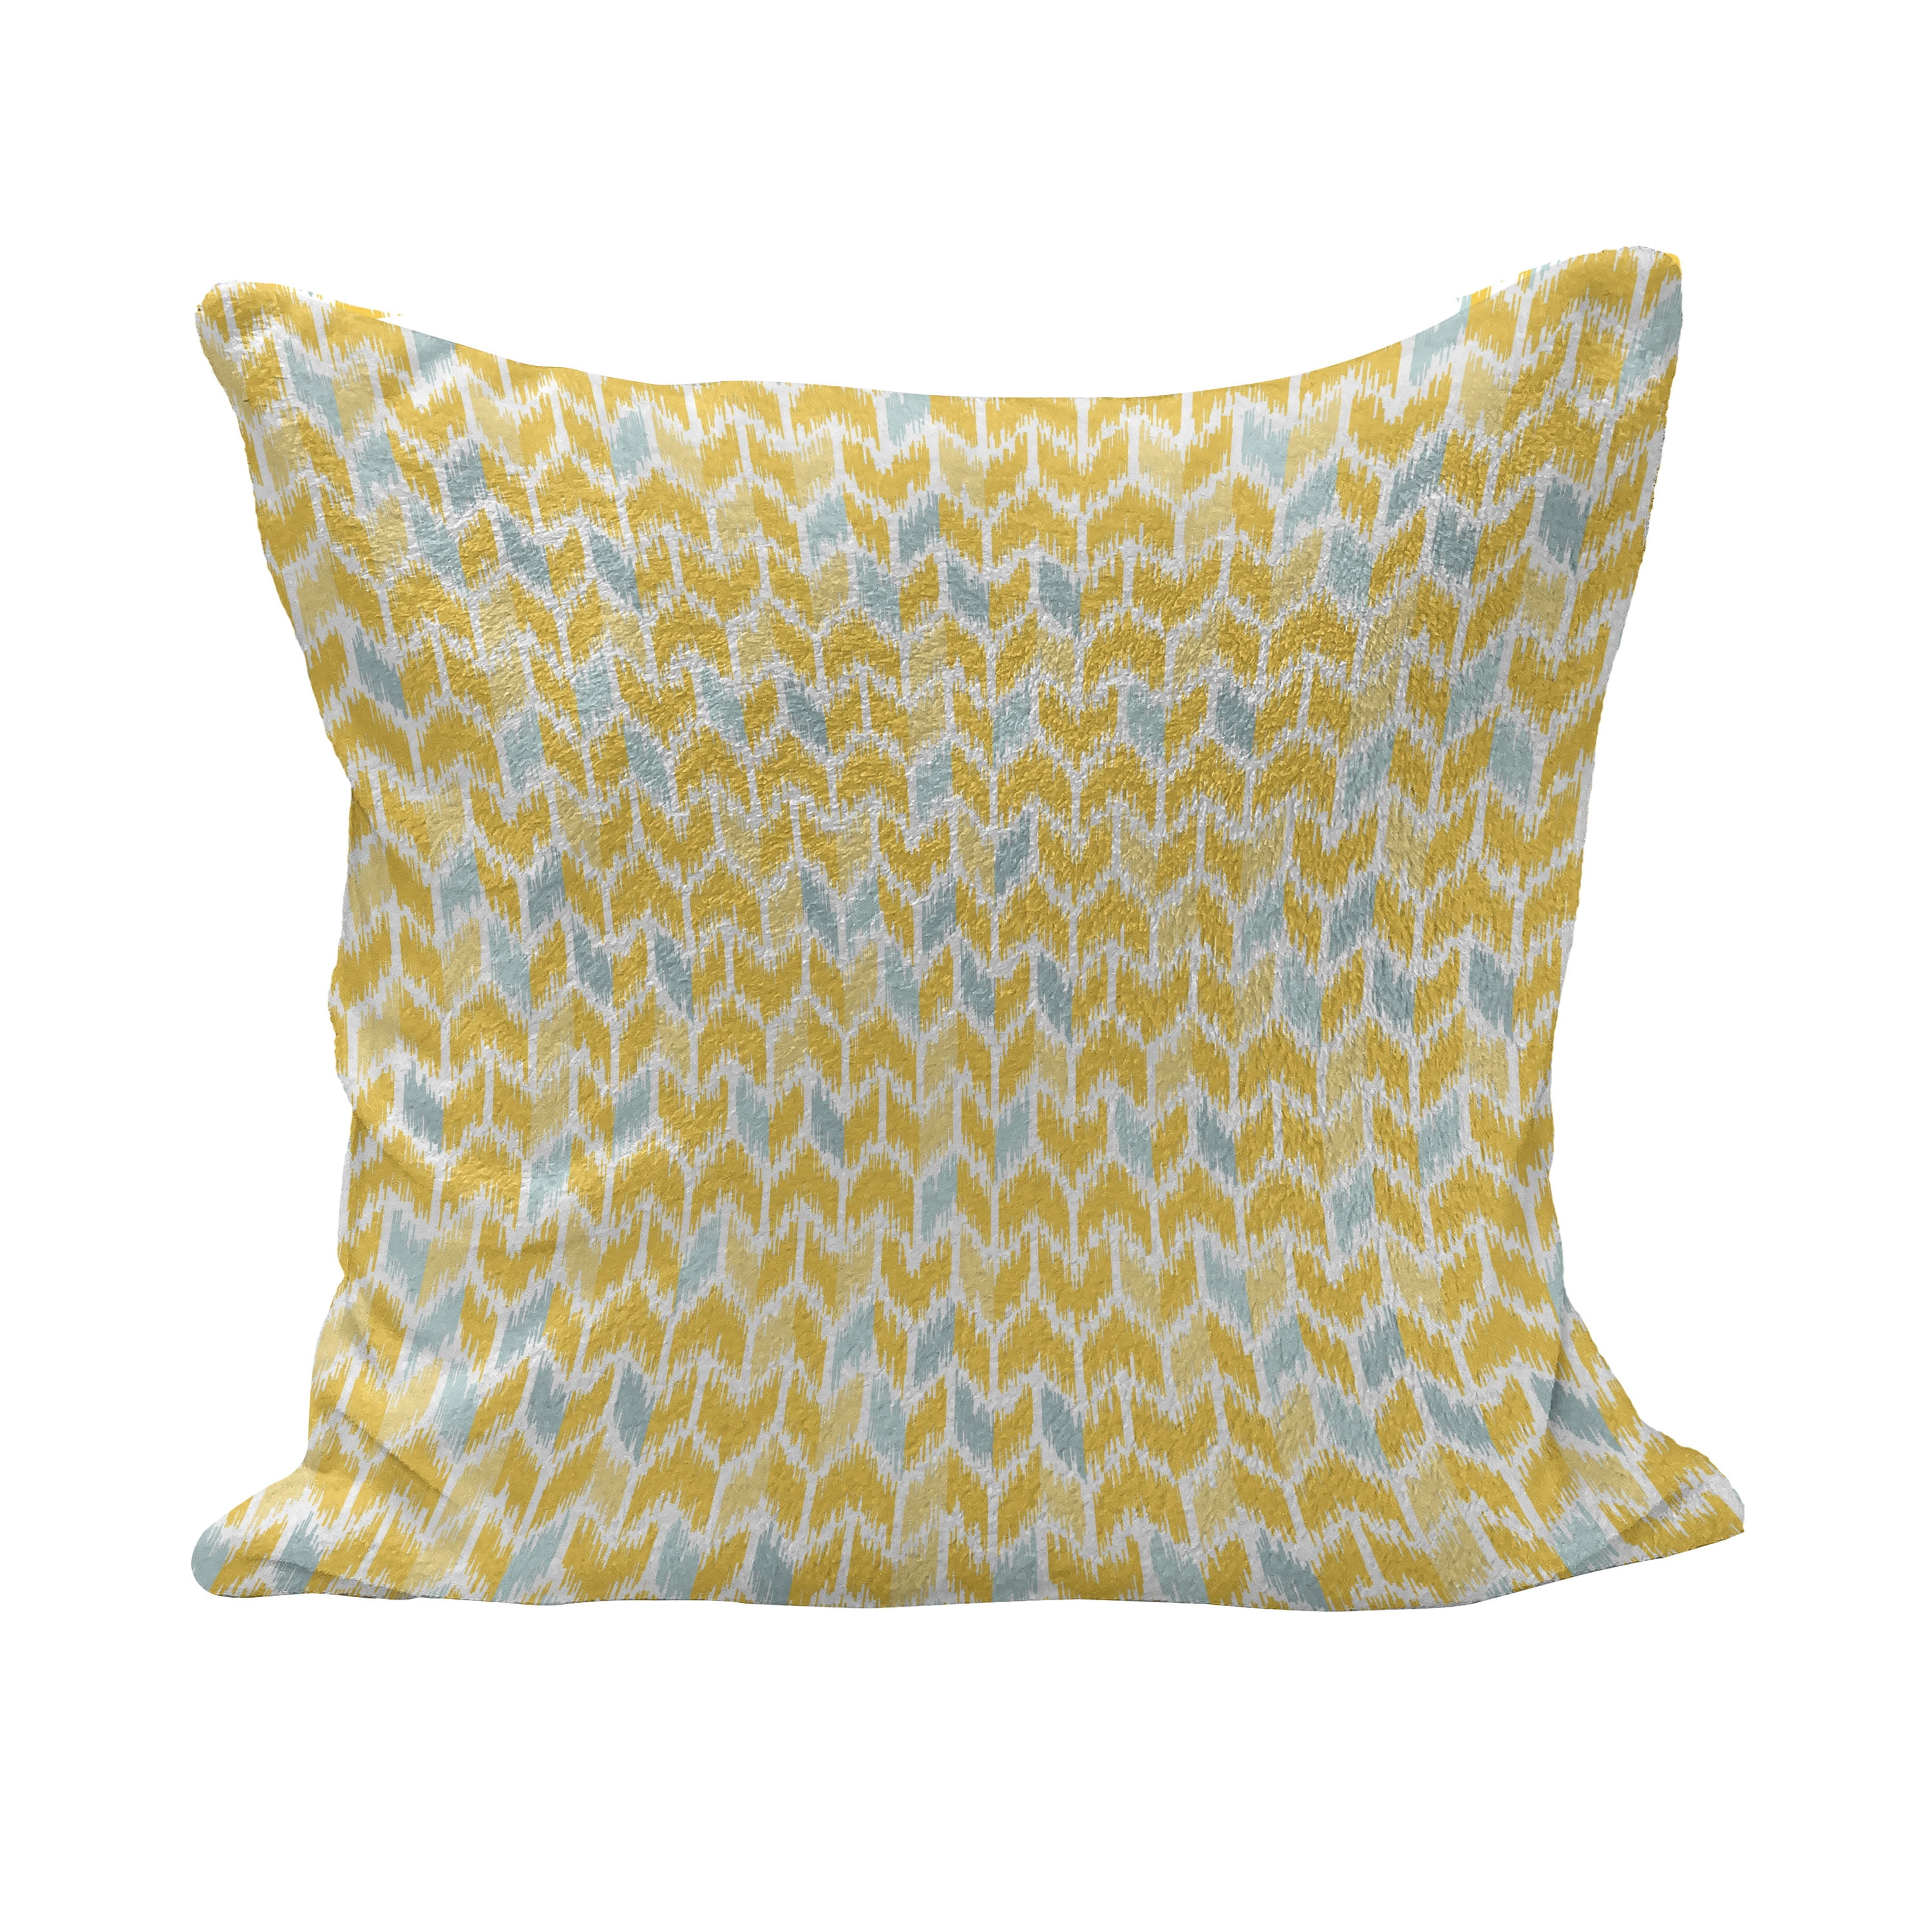 Chevron Ikat Throw Pillow Cover Lime Green Turquoise Brown Tan Beige Outdoor Decorative 18x18